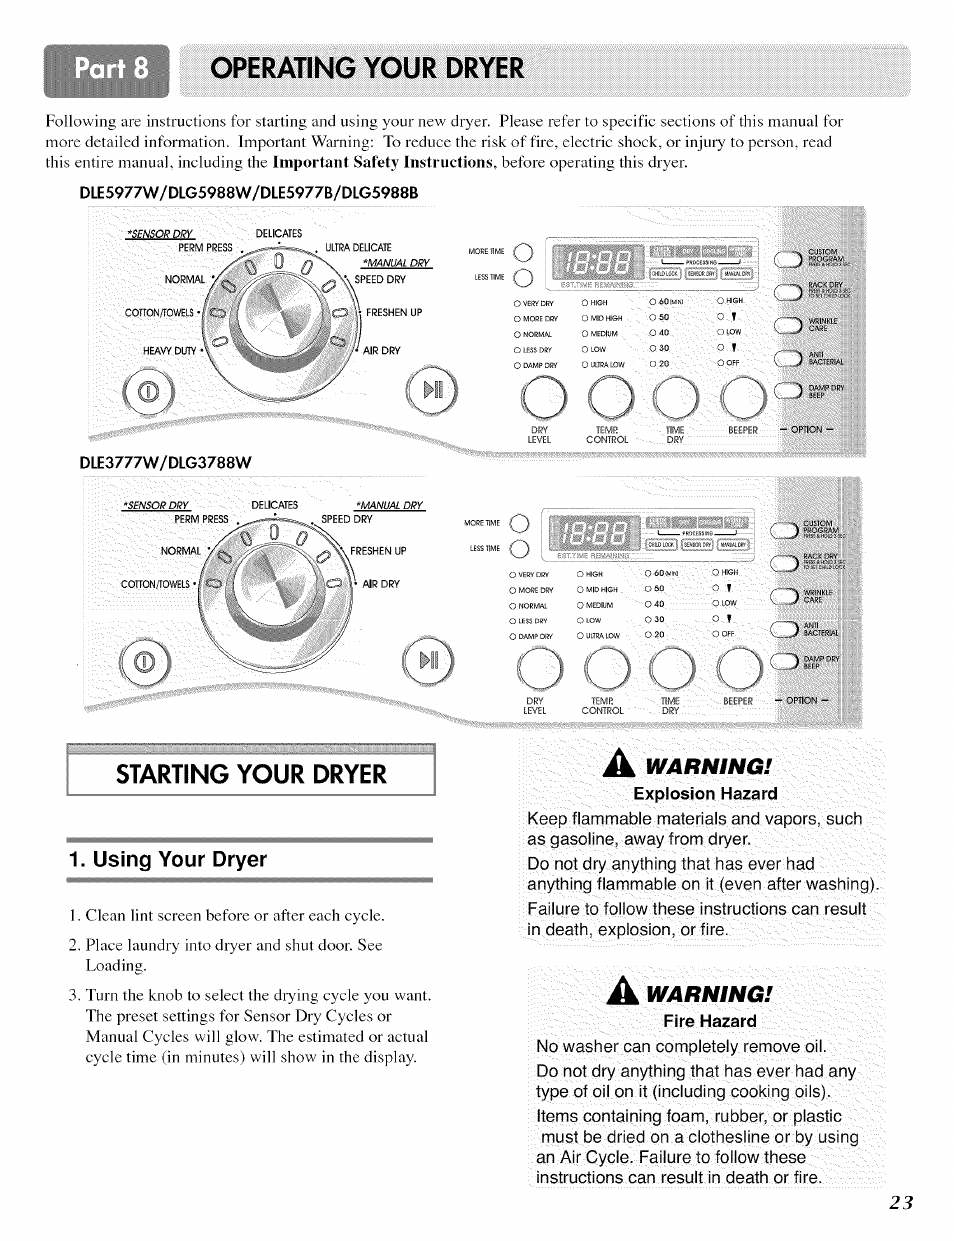 Explosion hazard, Fire hazard, Operating your dryer | Starting your dryer, Using your dryer, Warning | LG ELECTRIC AND GAS DRYER D 5988W User Manual | Page 23 / 32